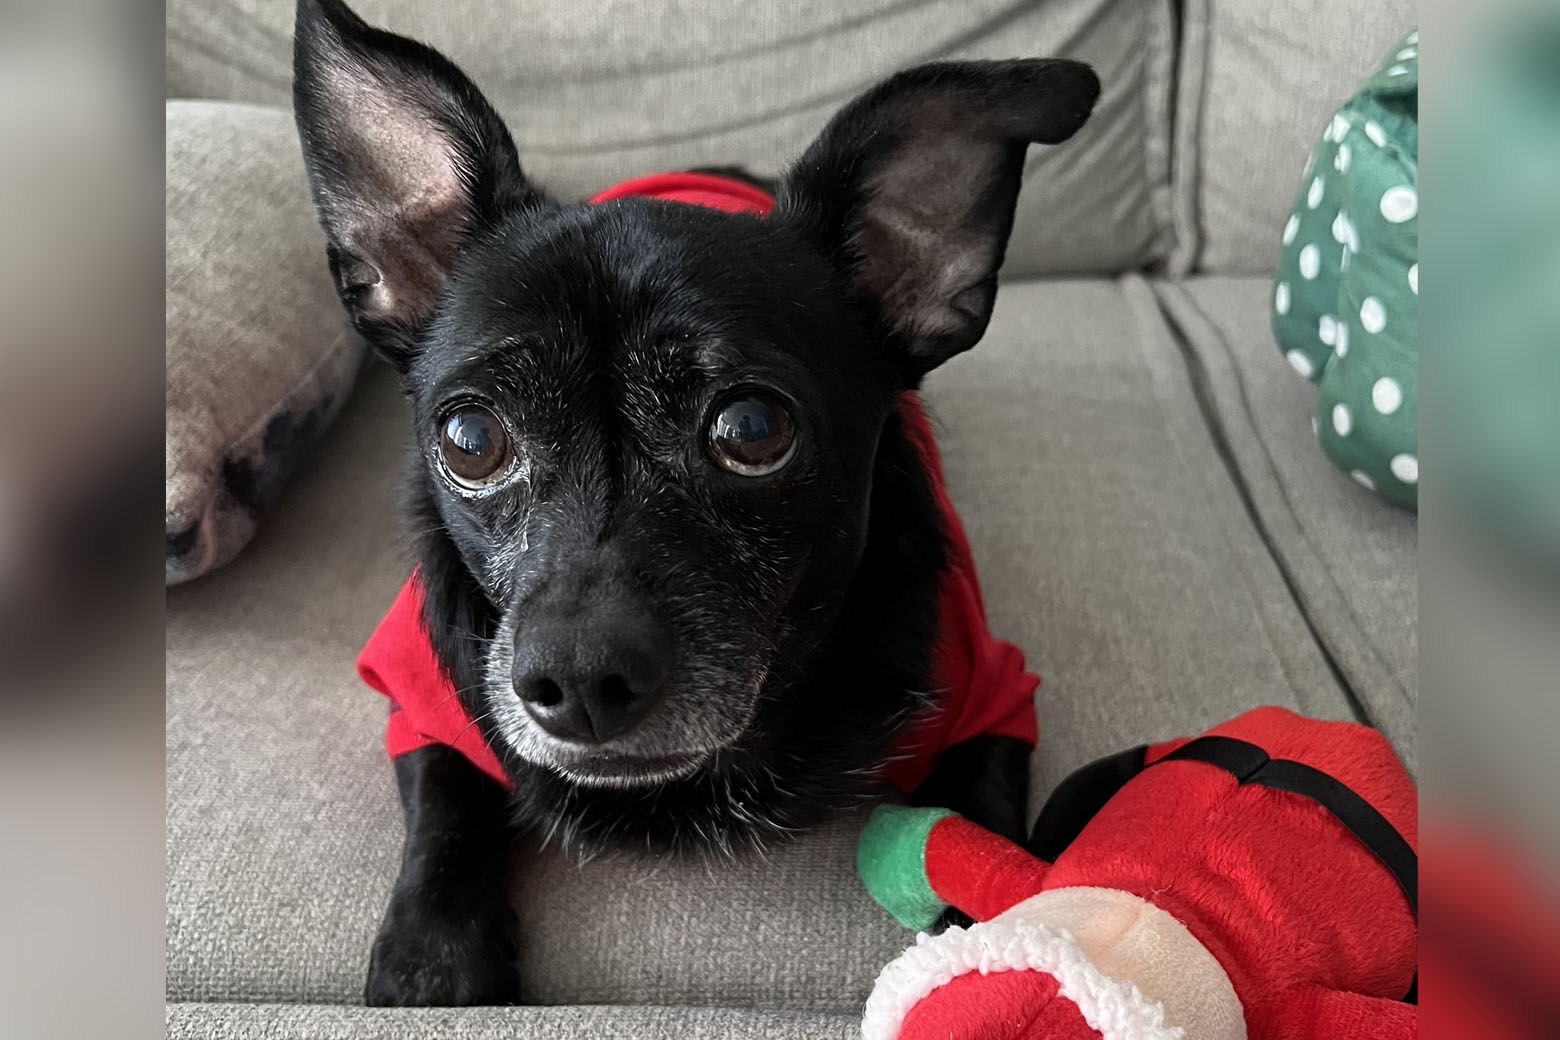 <p><strong>Biscuit</strong>’s new family reports that he is “loving and so sweet.” He shares a home with a chihuahua and a whippet mix.</p>
